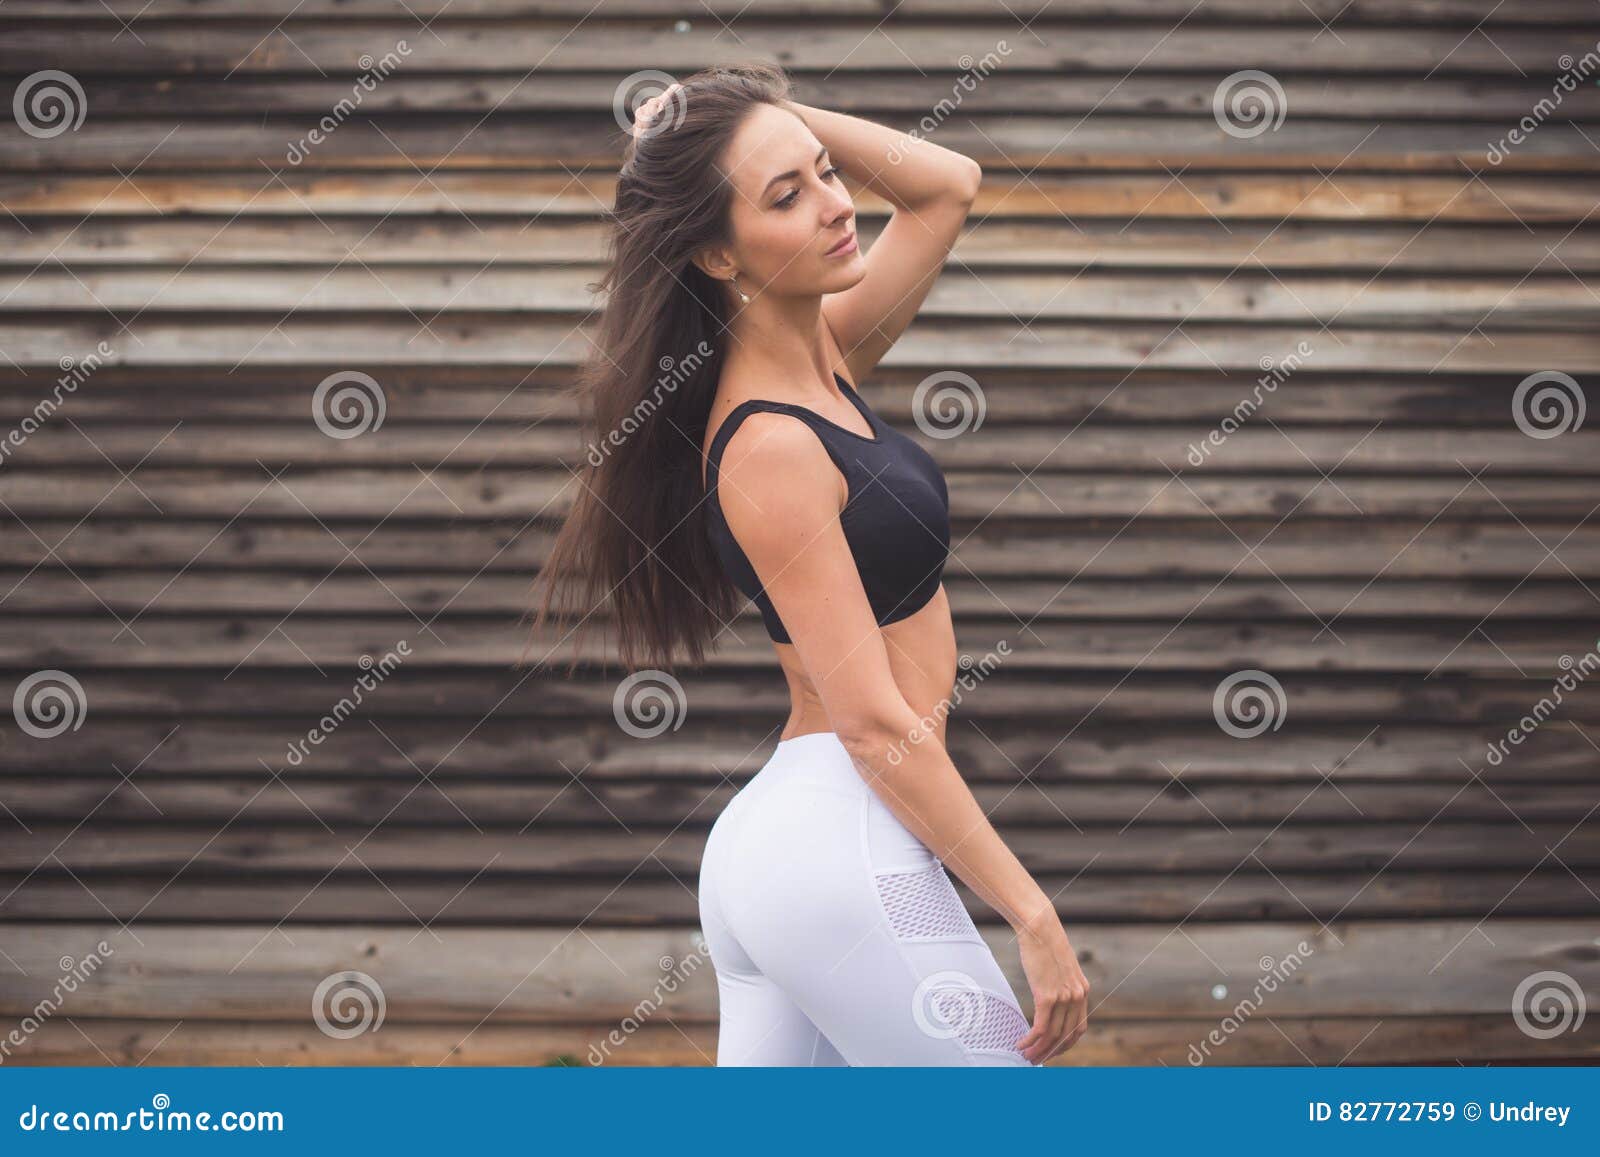 Young athletic woman in sportswear posing in studio against black  background. Ideal female sports figure. Fitness girl with perfect sculpted  muscular and tight body. Stock Photo